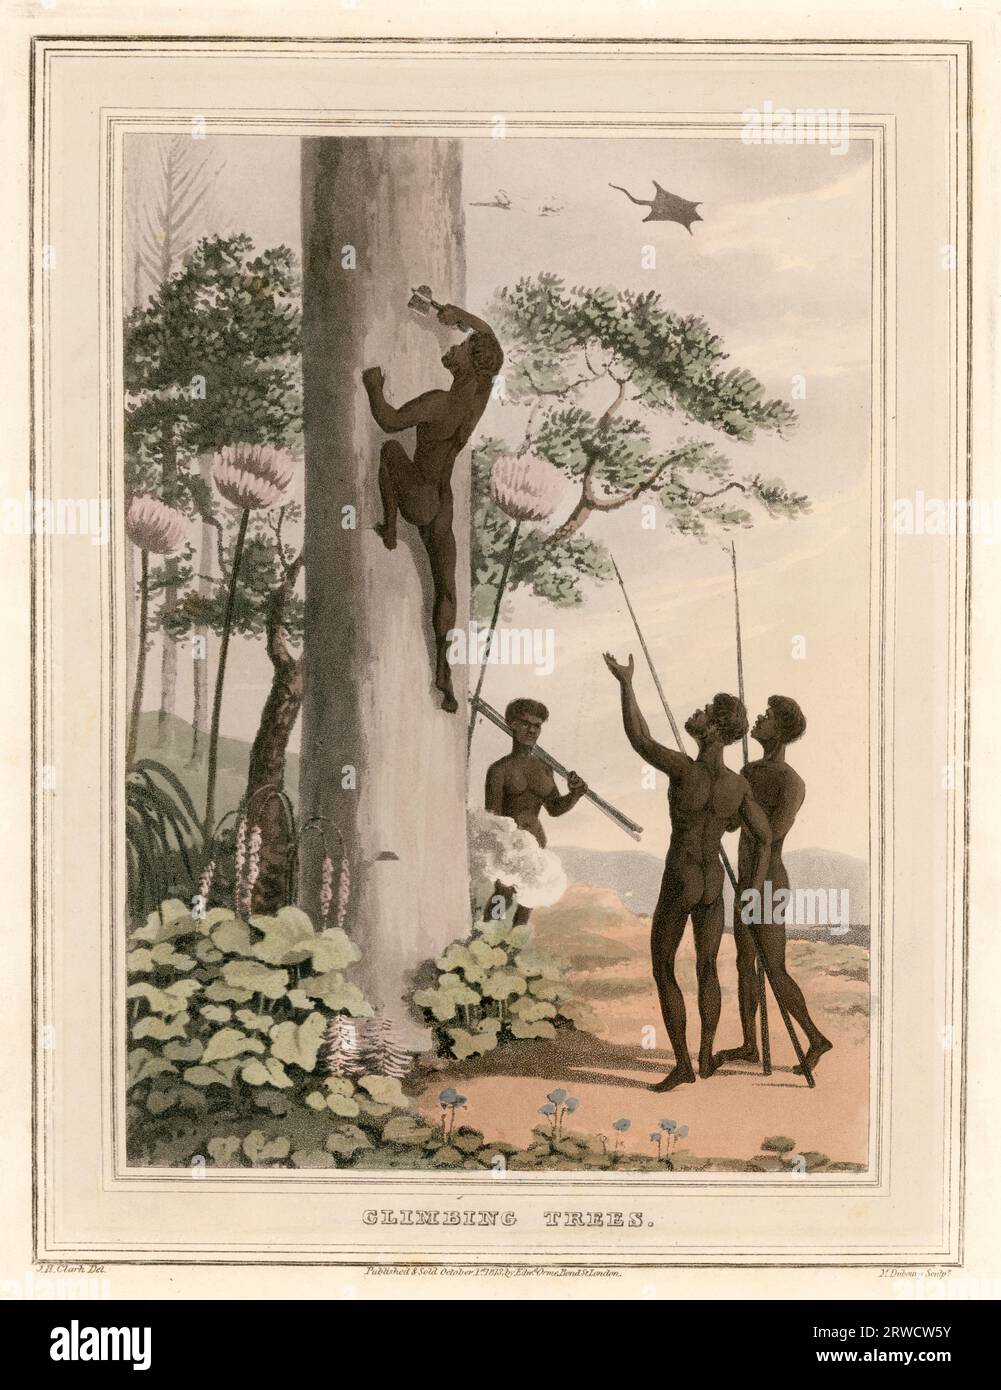 Climbing trees. Aboriginal Australian man using a small axe to climb a tree, other men carrying spears standing at base of tree, flying fox overhead, possibly disturbed by climber. by Dubourg, M, fl 1786-1808, engraver. Clark, John Heaviside, ca 1770-1863, artist. Date: 1813. Stock Photo